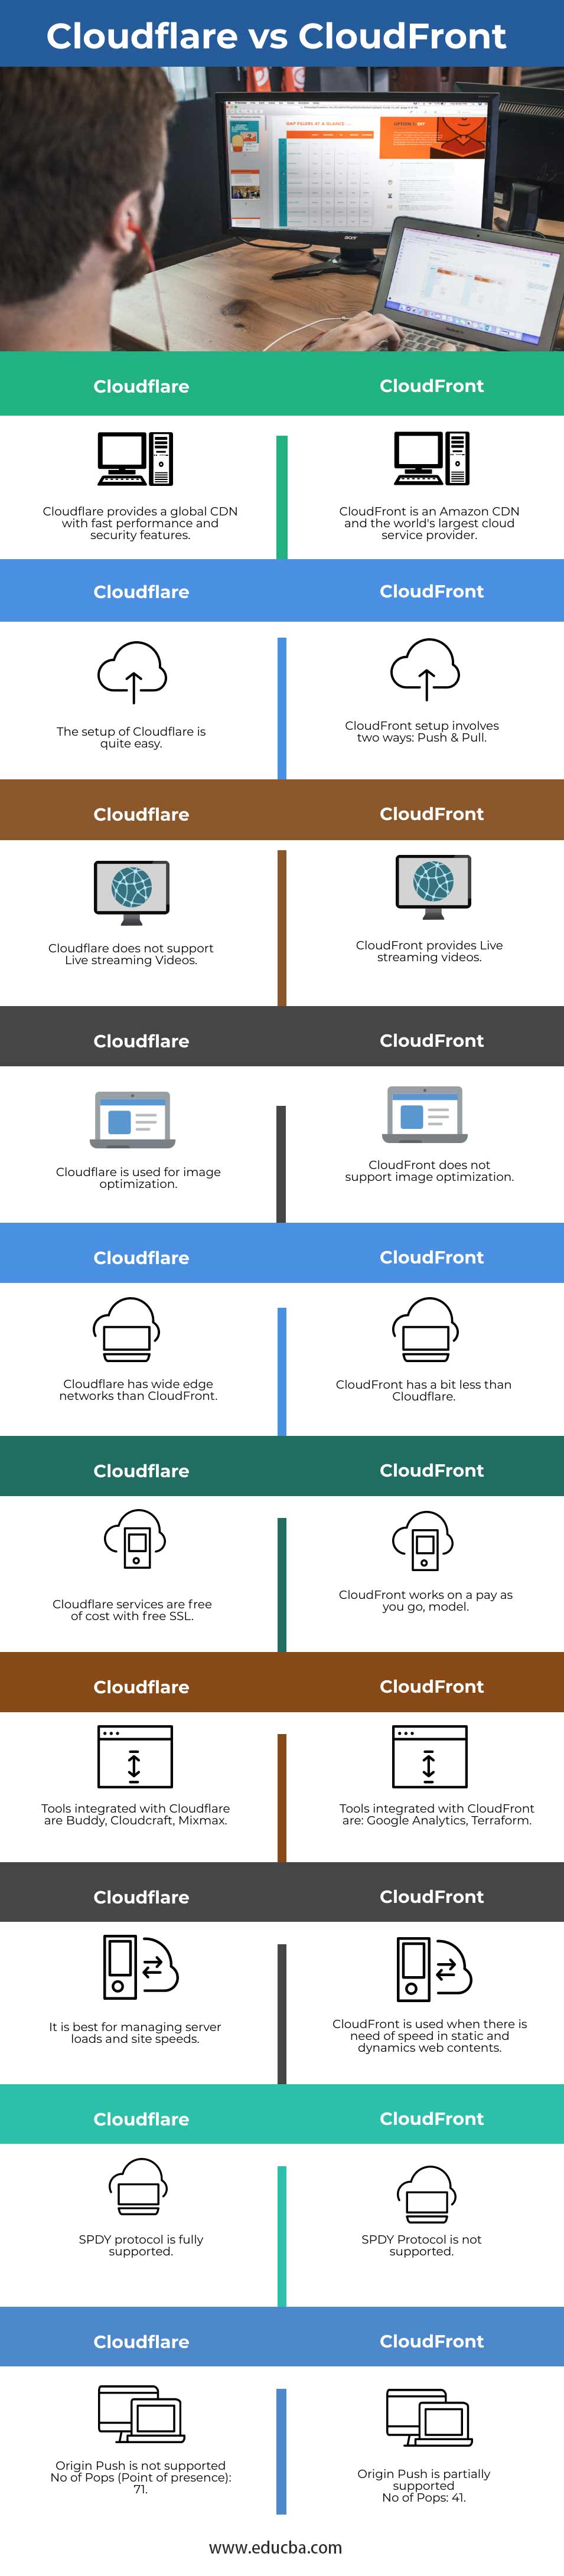 Cloudflare vs CloudFront-info